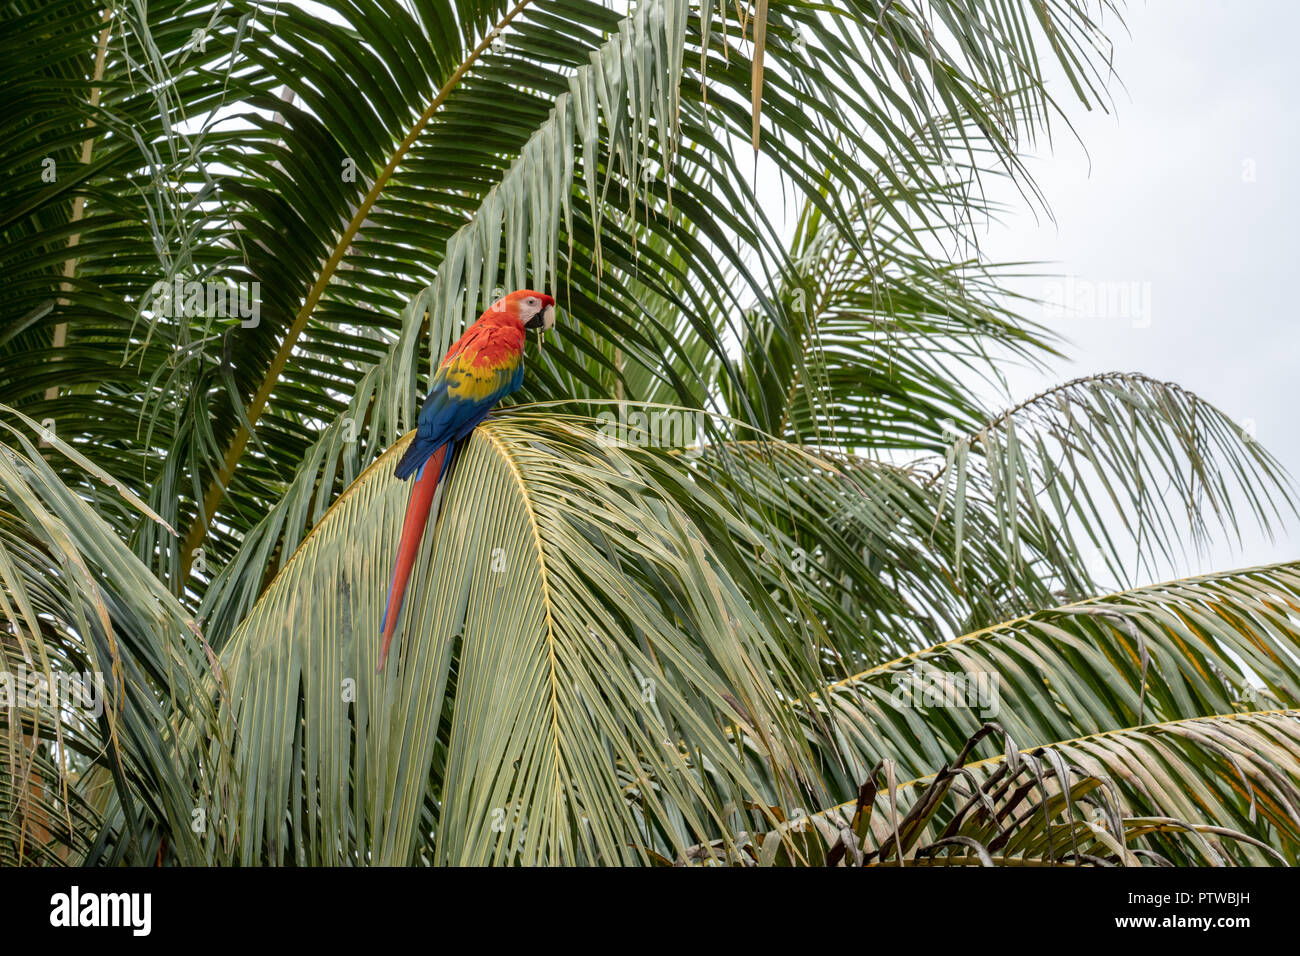 Puerto Miguel Peru, South America.  Scarlet Macaw perched in a palm tree. Stock Photo